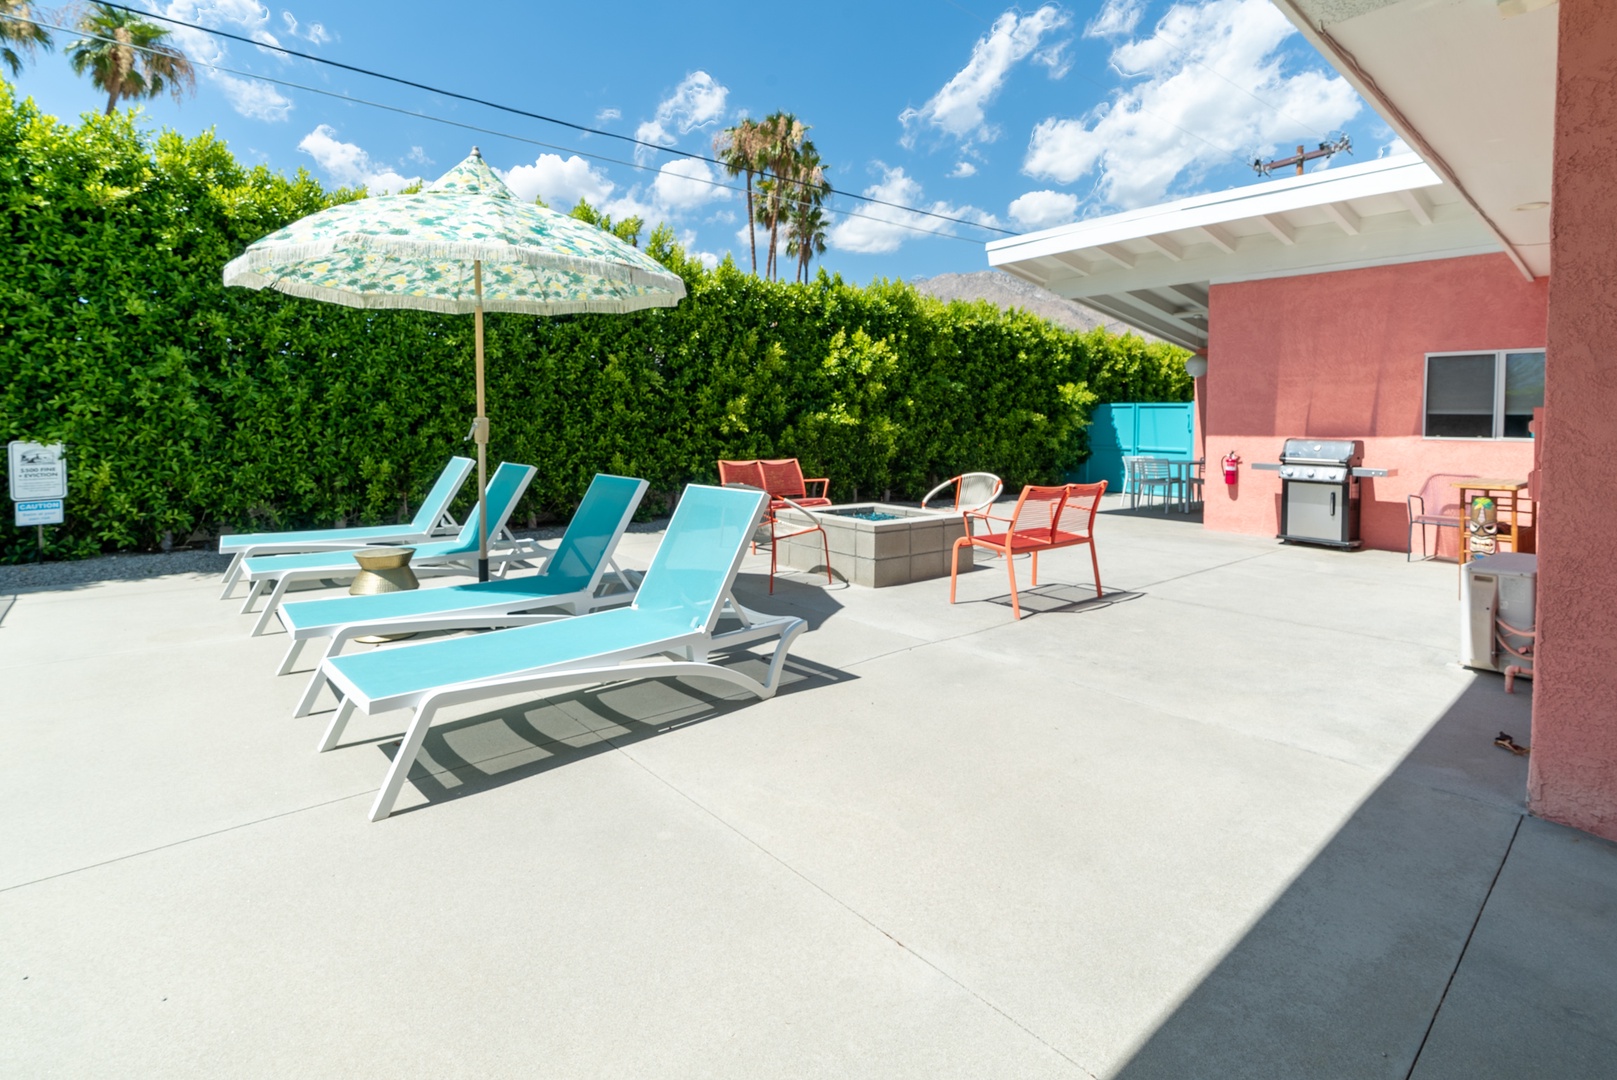 Spacious backyard with an abundance of seating, photo op wall, private pool, and hot tub